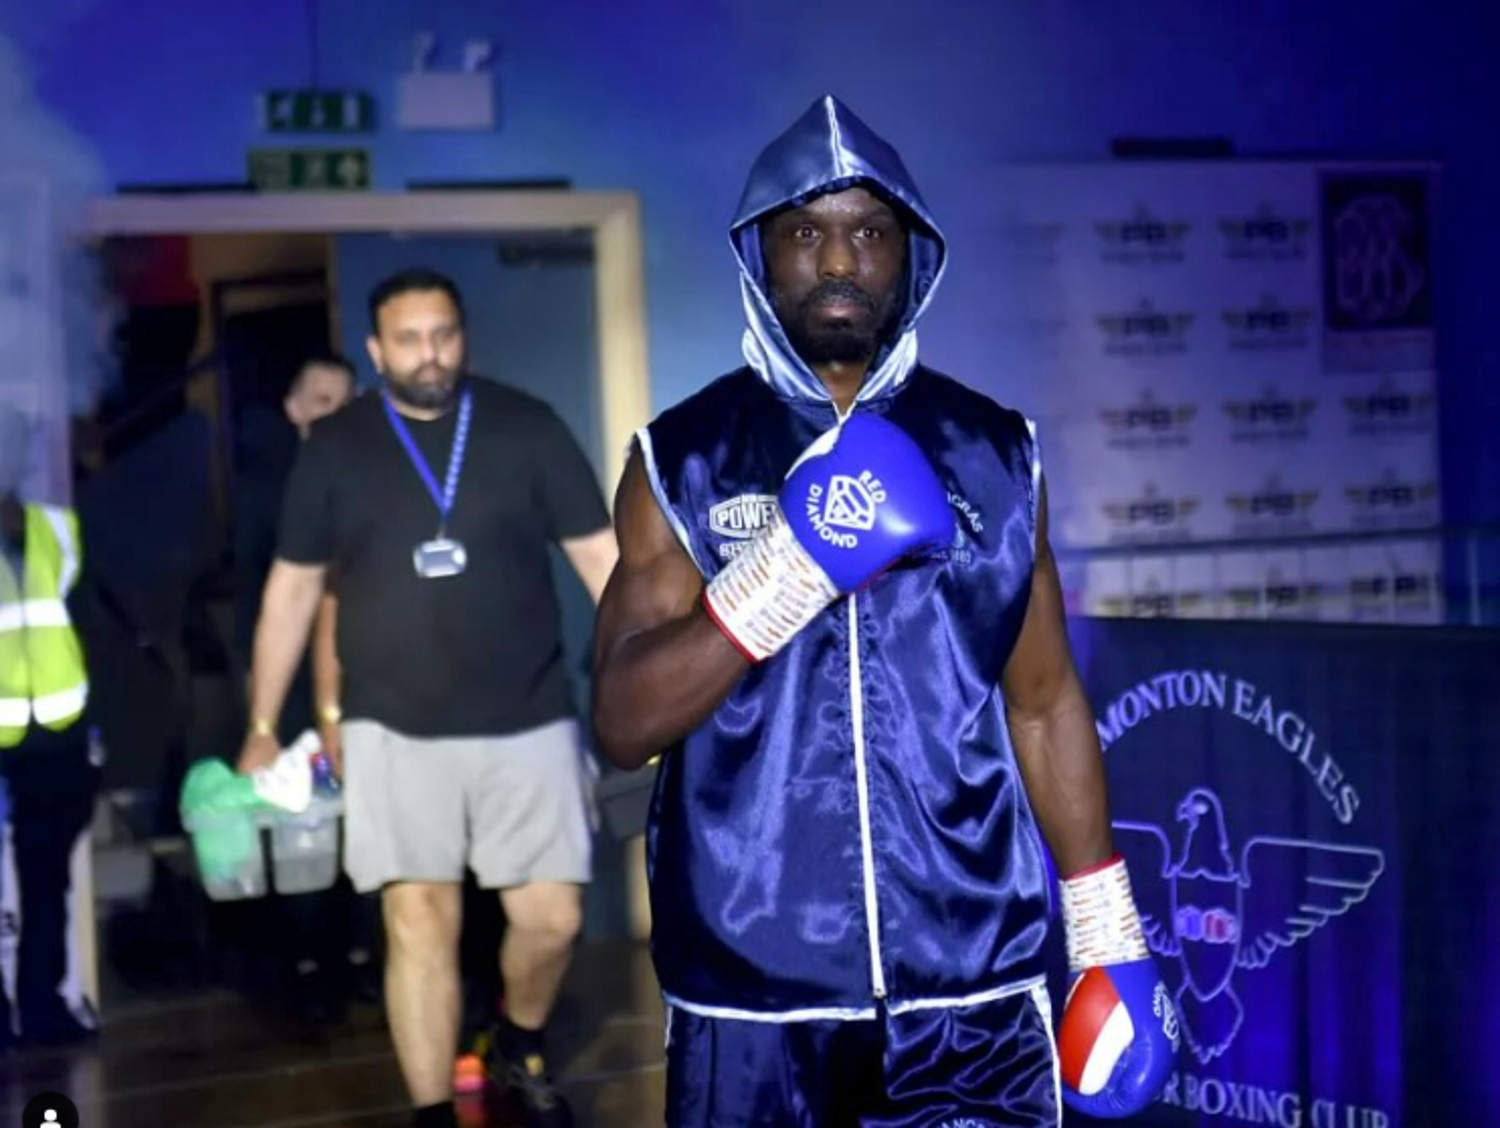 British boxer Sherif Lawal dies after collapsing in the ring during professional fight debut